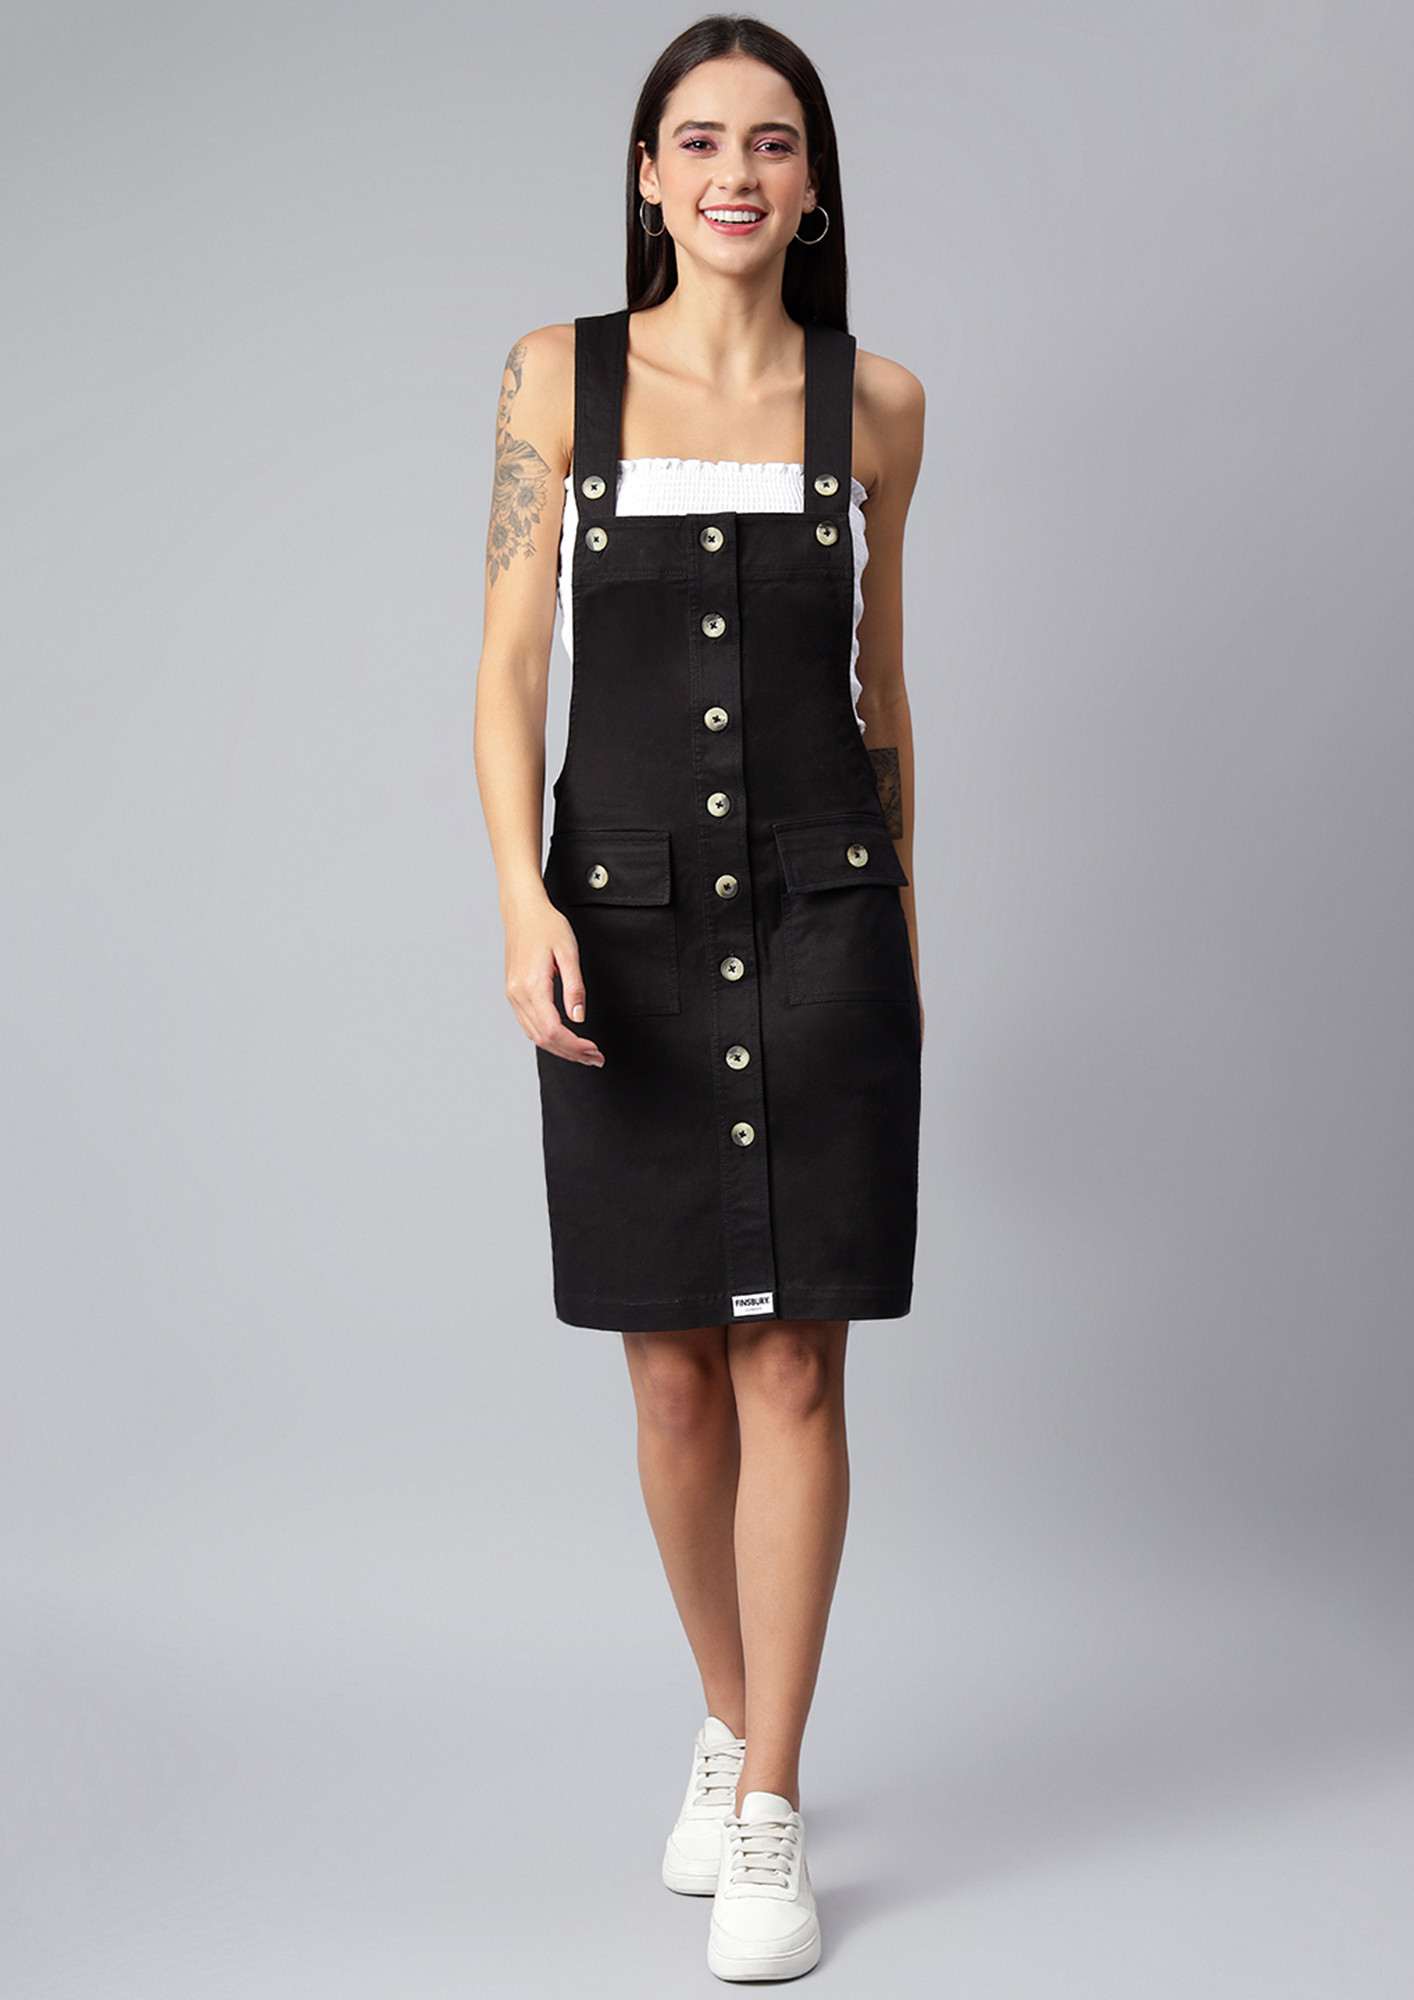 FINSBURY LONDON Women's Dungaree Dress with Front Button Opening - Ebony Black